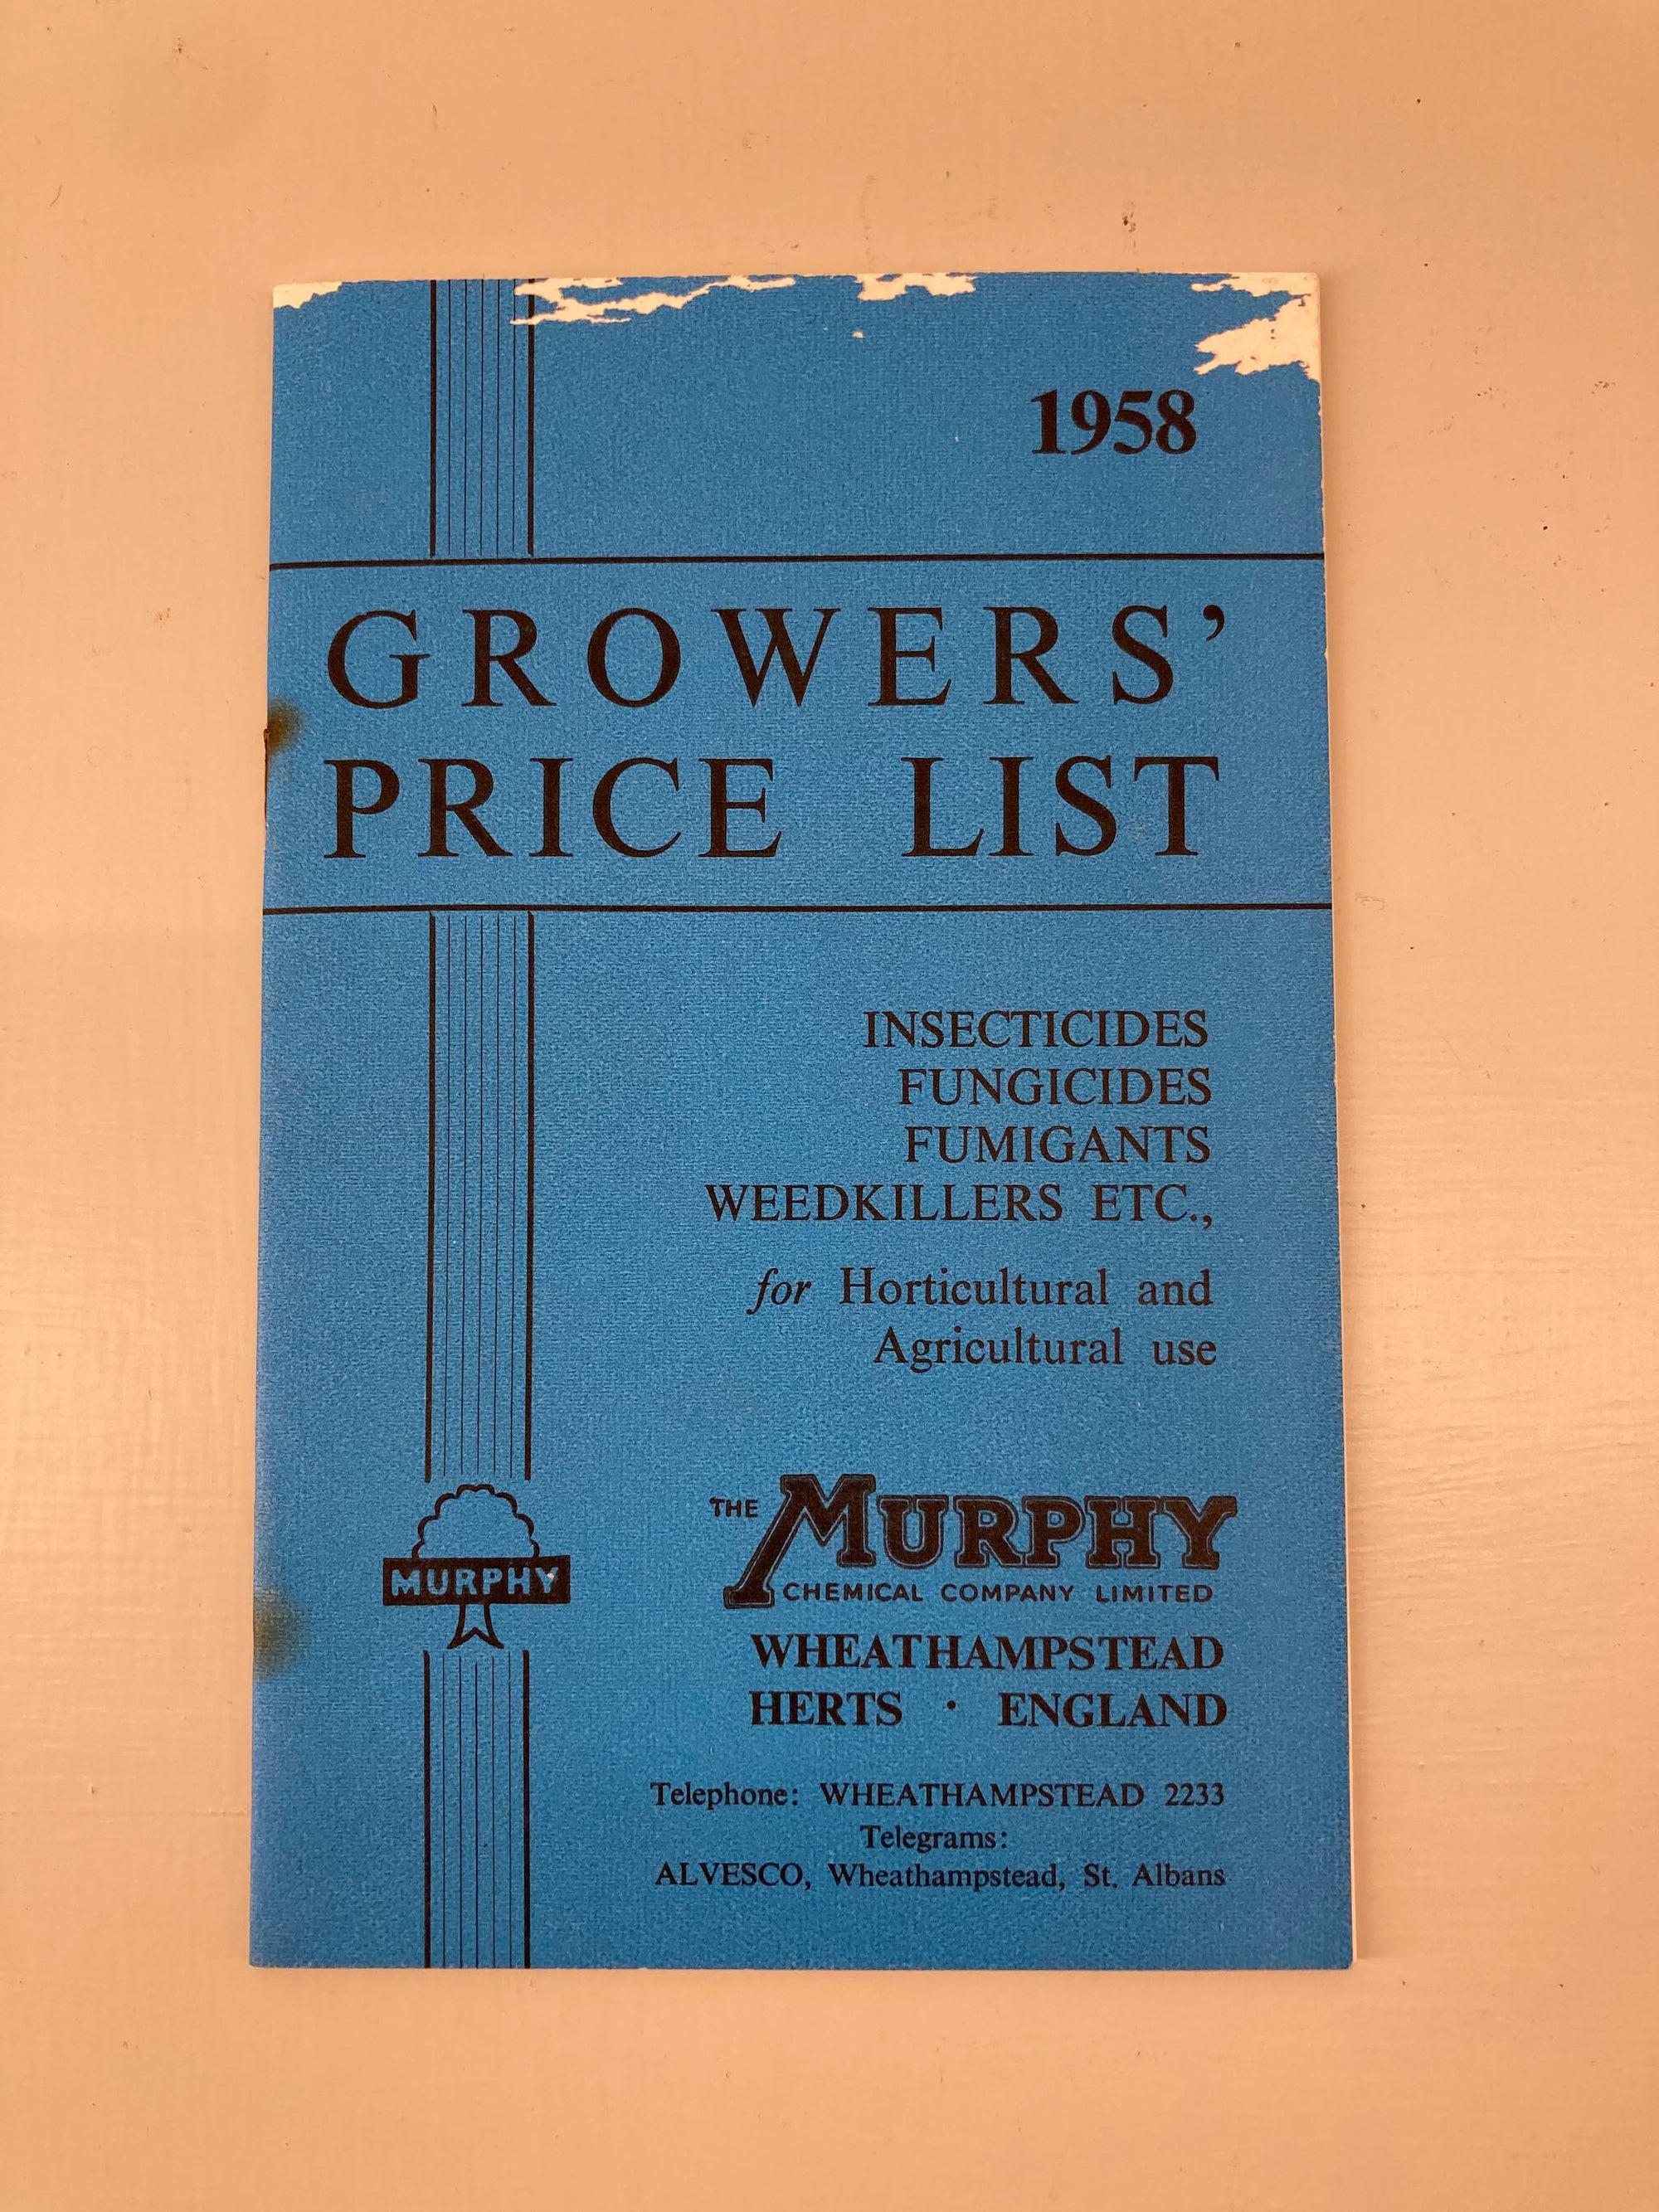 Murphy Chemicals List for 1958